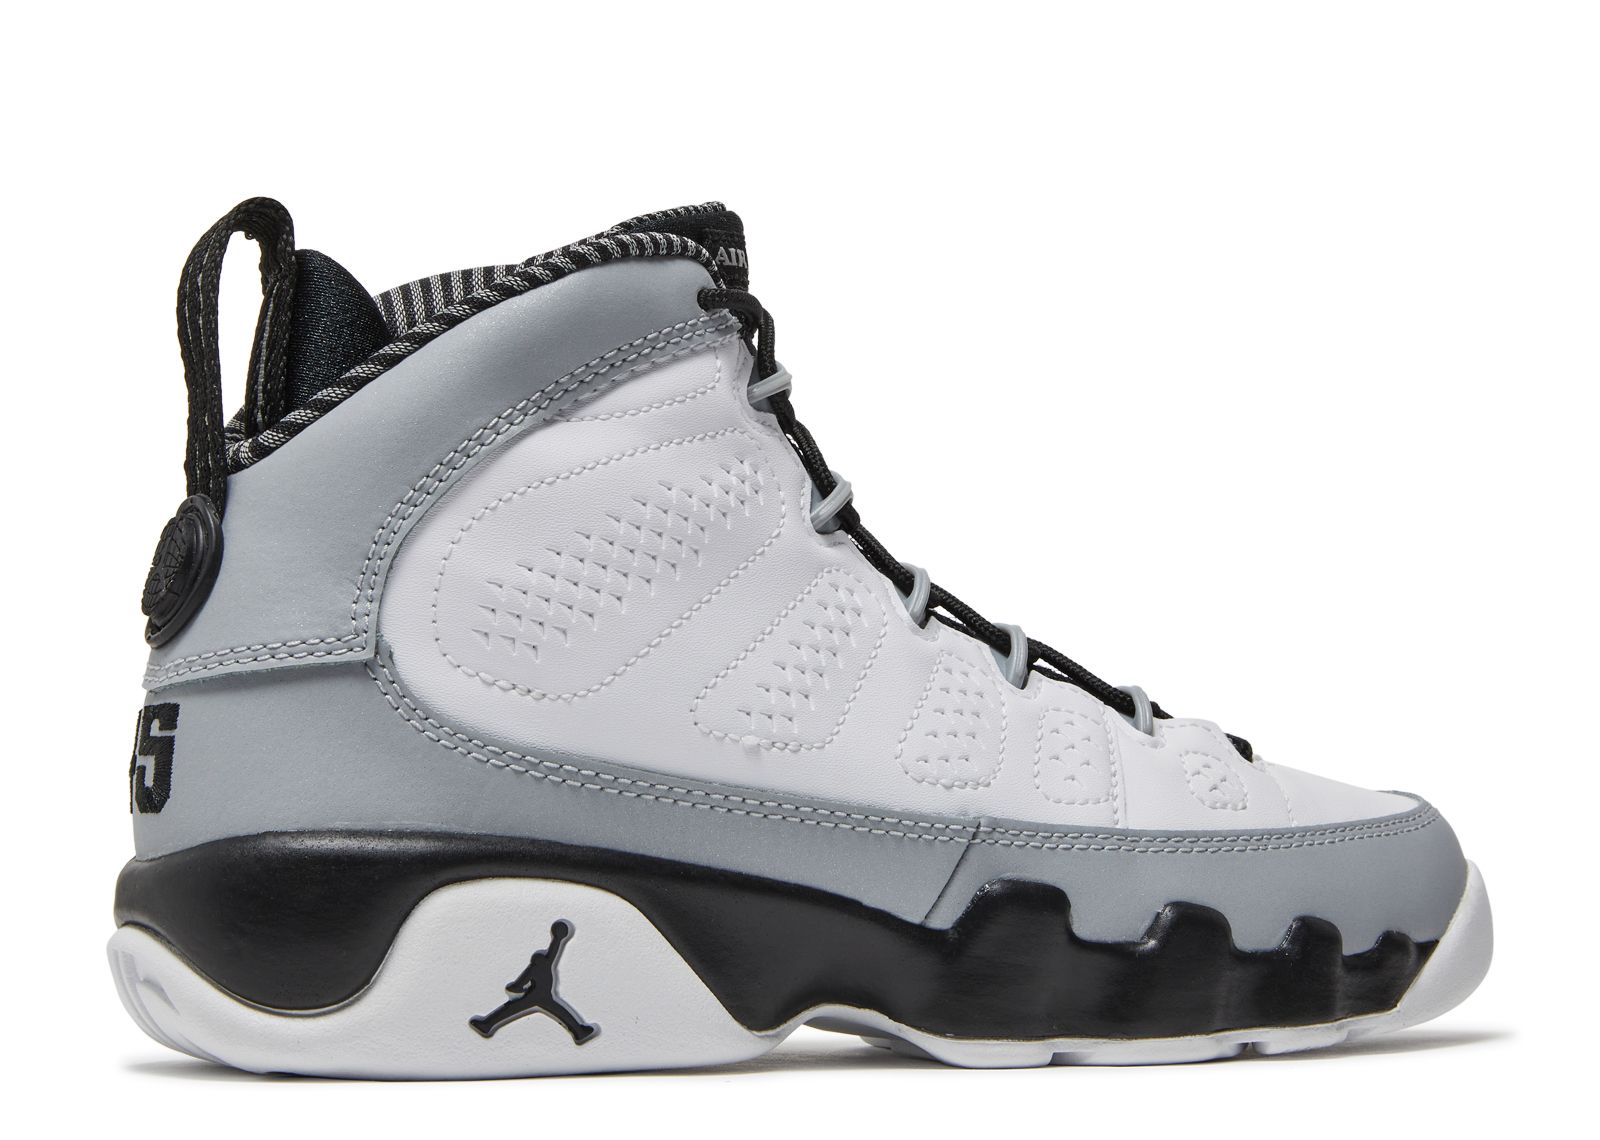 baron 9s release date